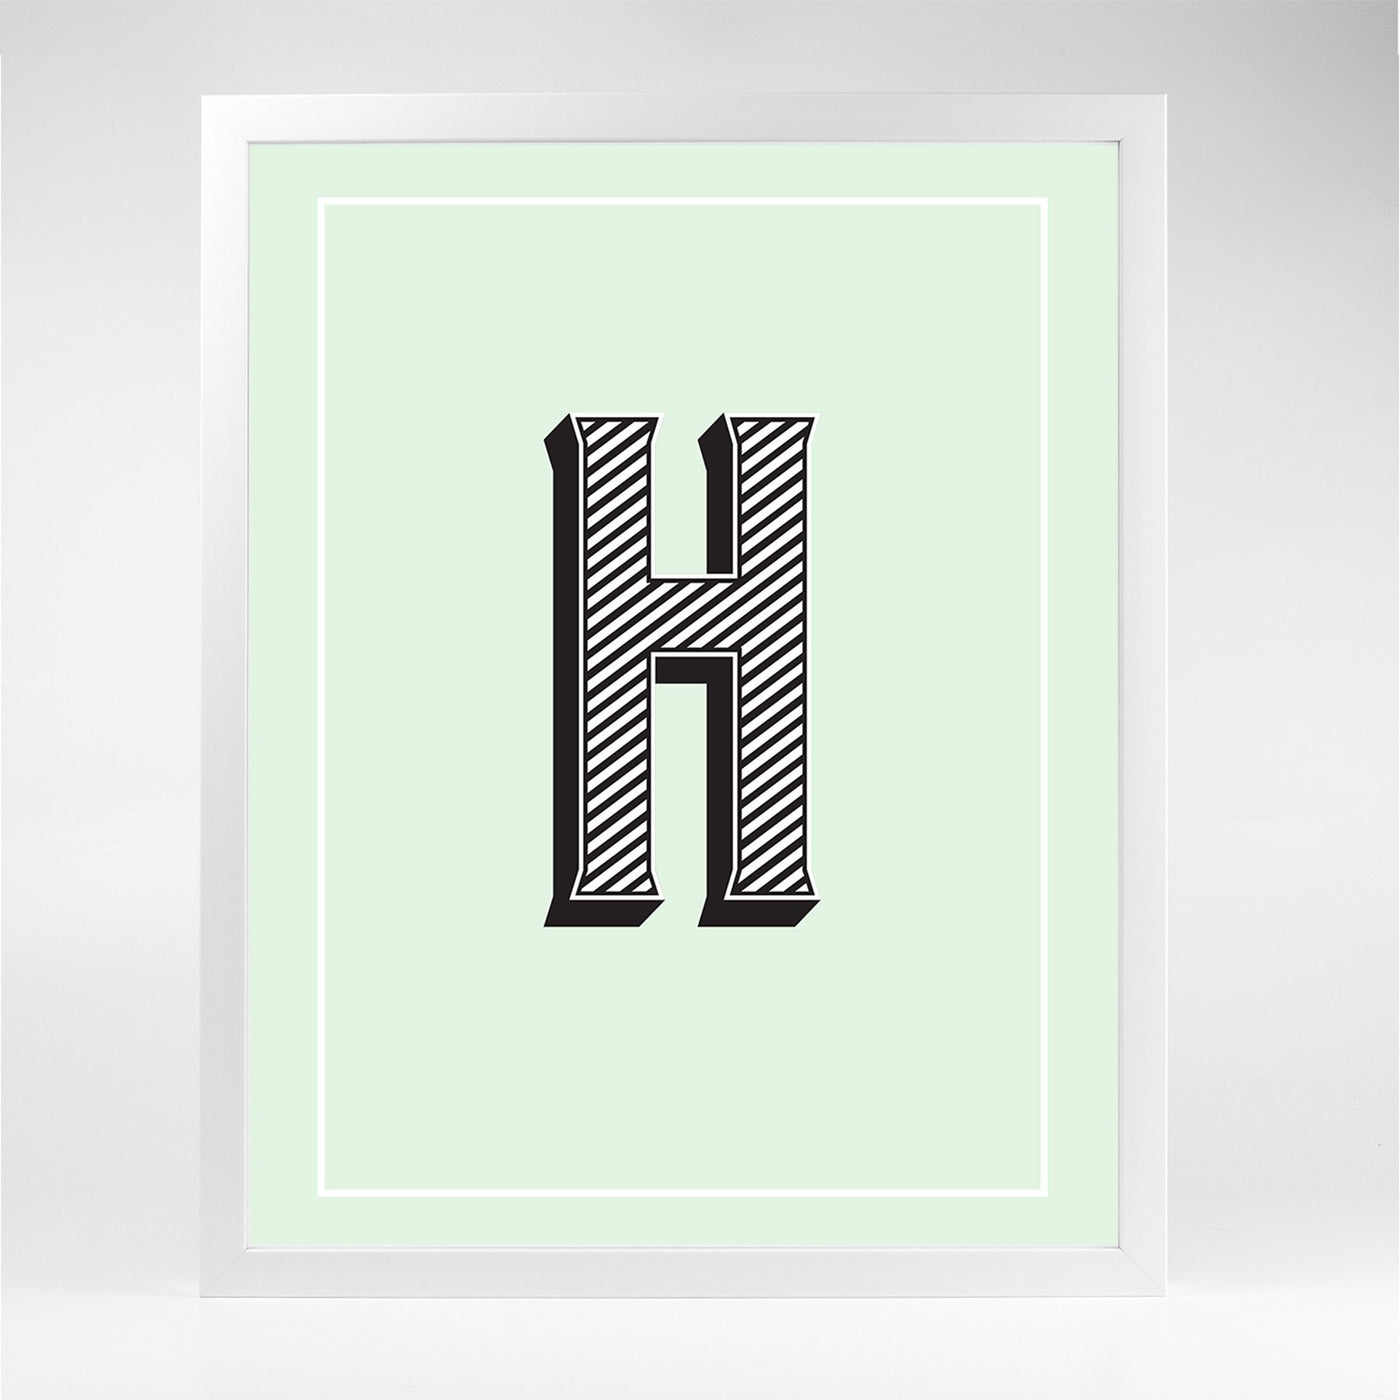 Gallery Prints H The Letter Series Katie Kime